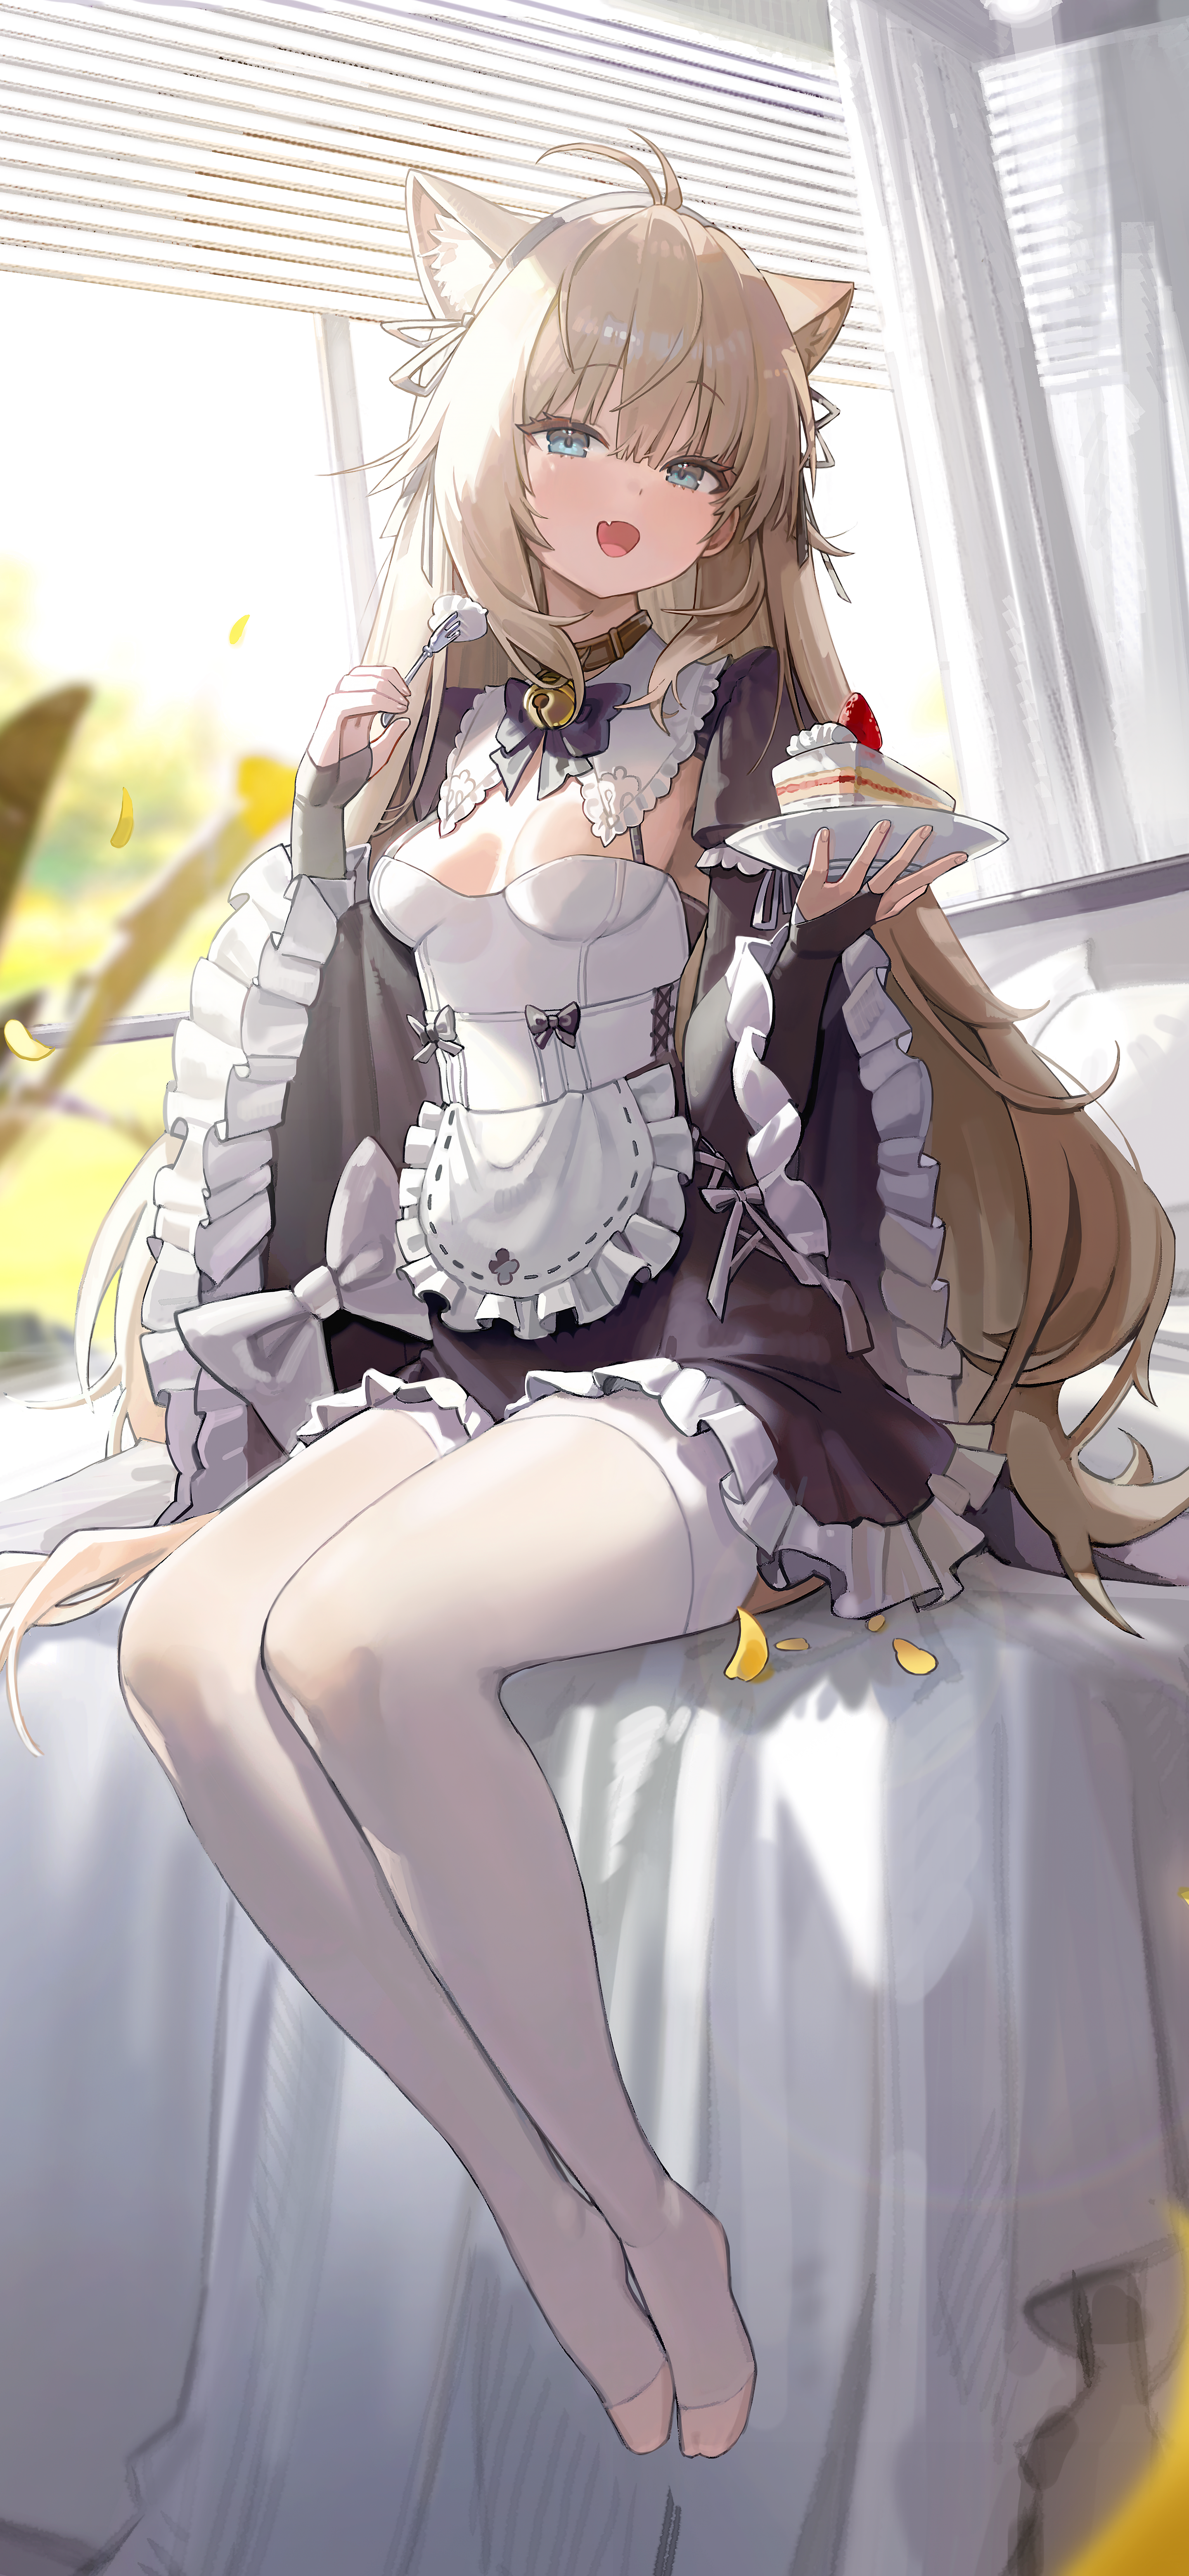 Anime 2880x6240 anime anime girls portrait display maid maid outfit cake cat girl cat ears sweets fork